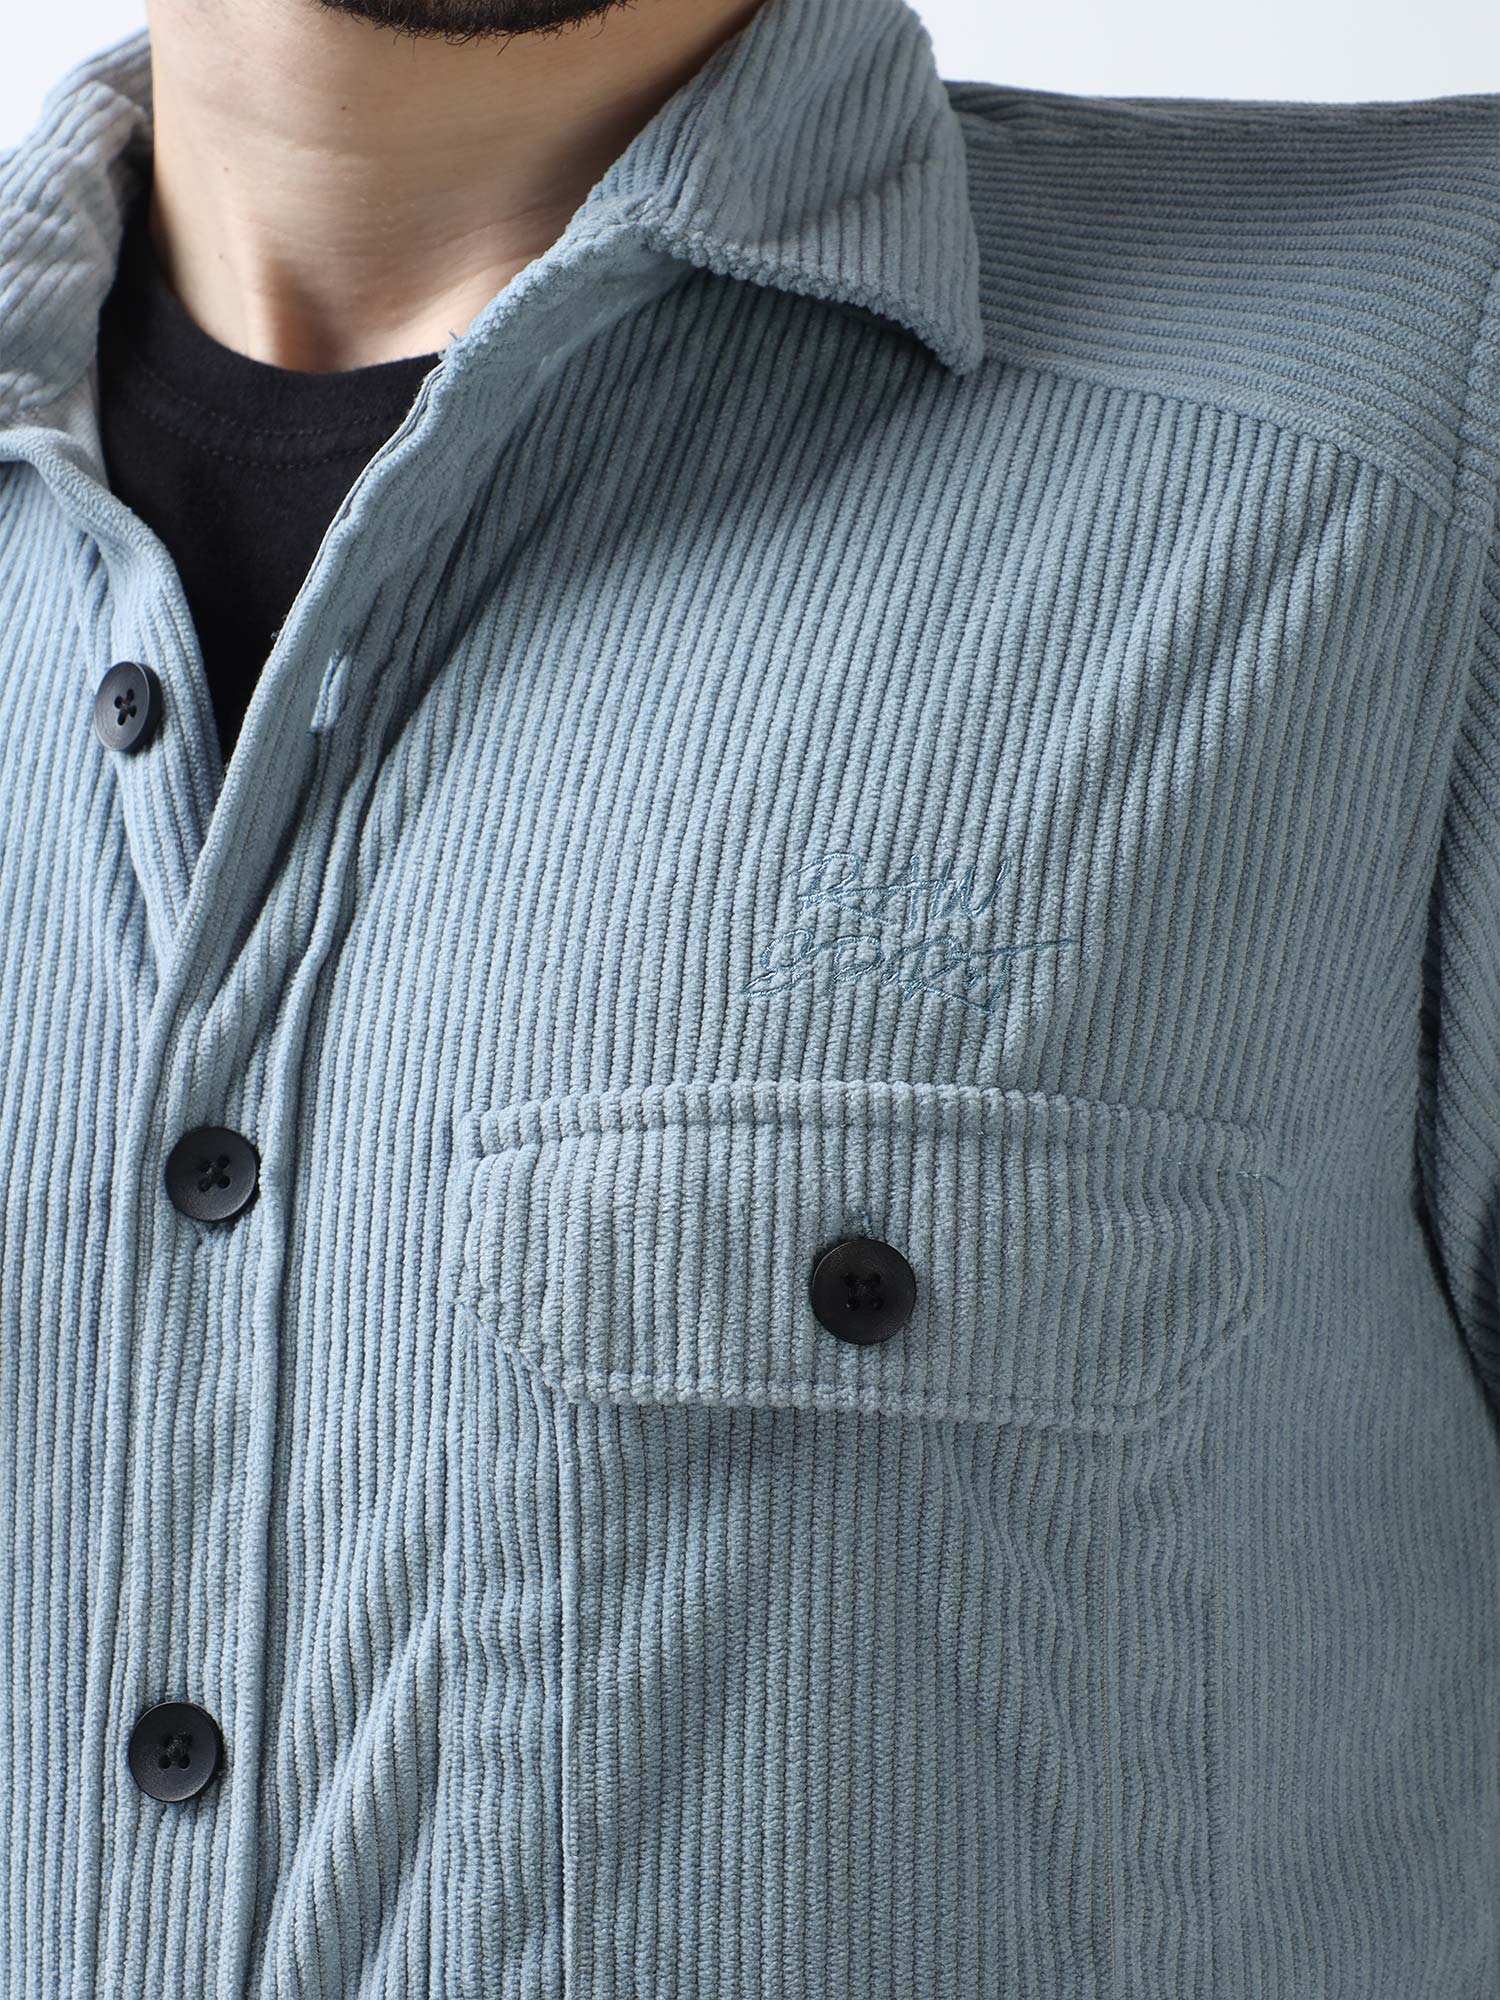 Cadet Blue Corduroy Double Pocket Shirt With Elbow Patch